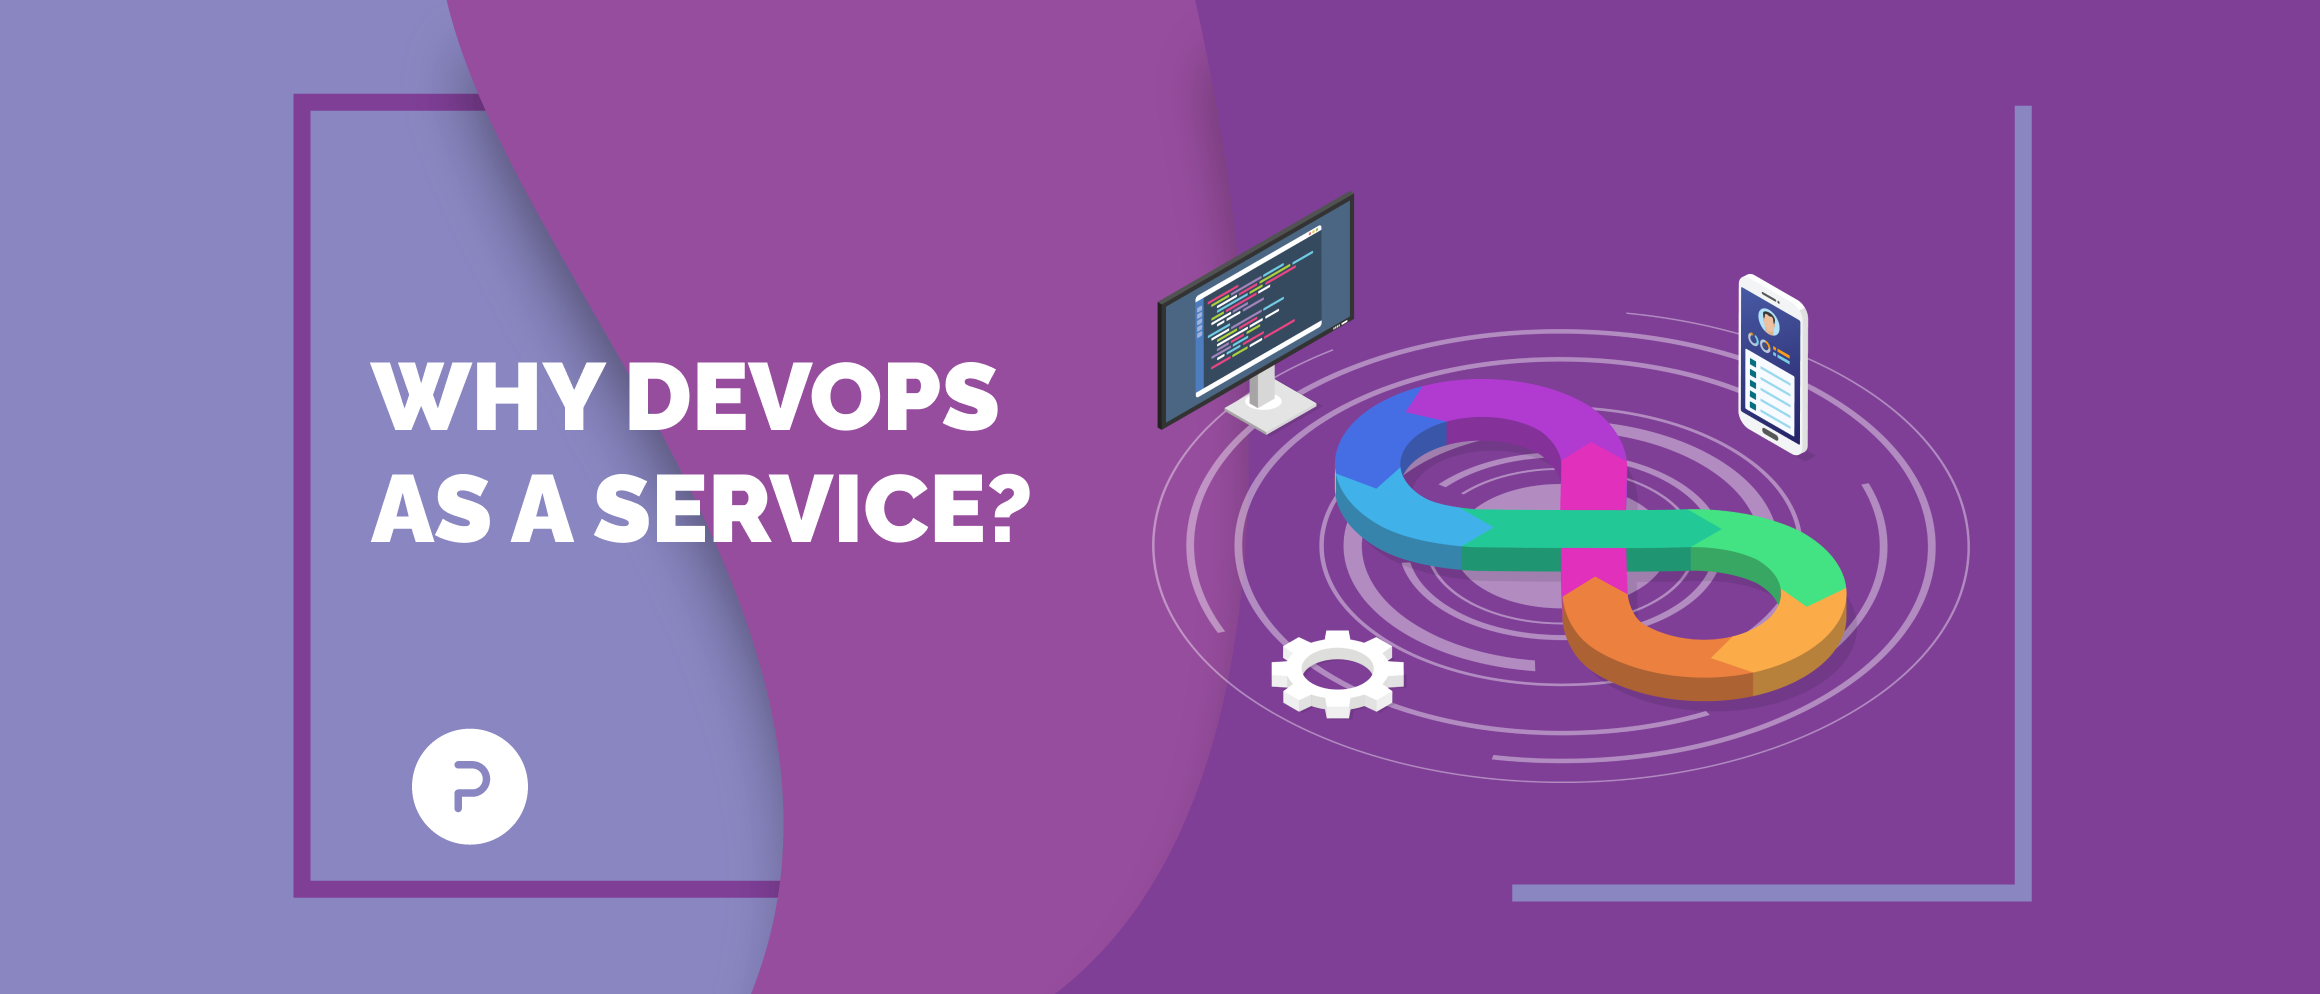 Top 5 reasons why your startup should choose DevOps as a Service